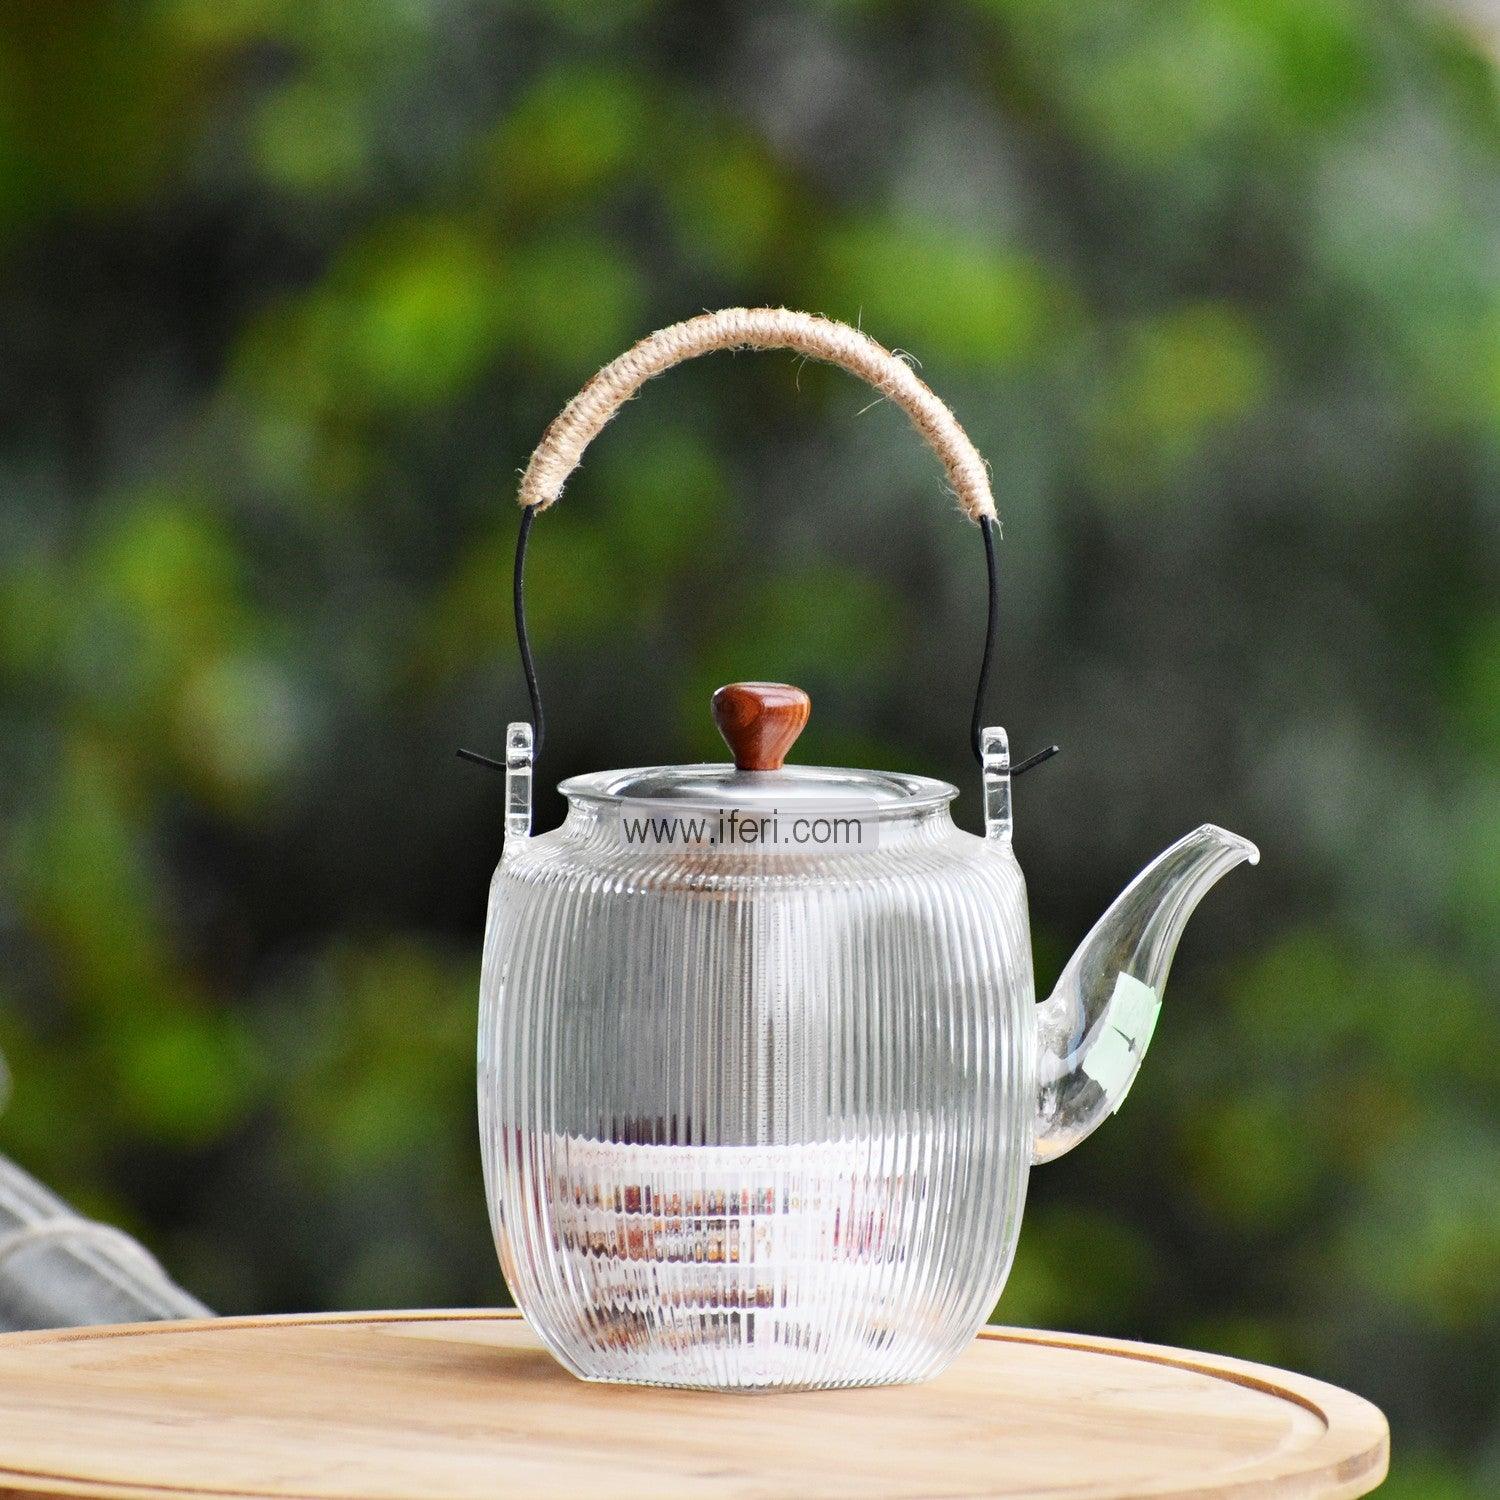 5 Inch Tempered Glass Tea Pot with Infuser RY0141 Price in Bangladesh - iferi.com